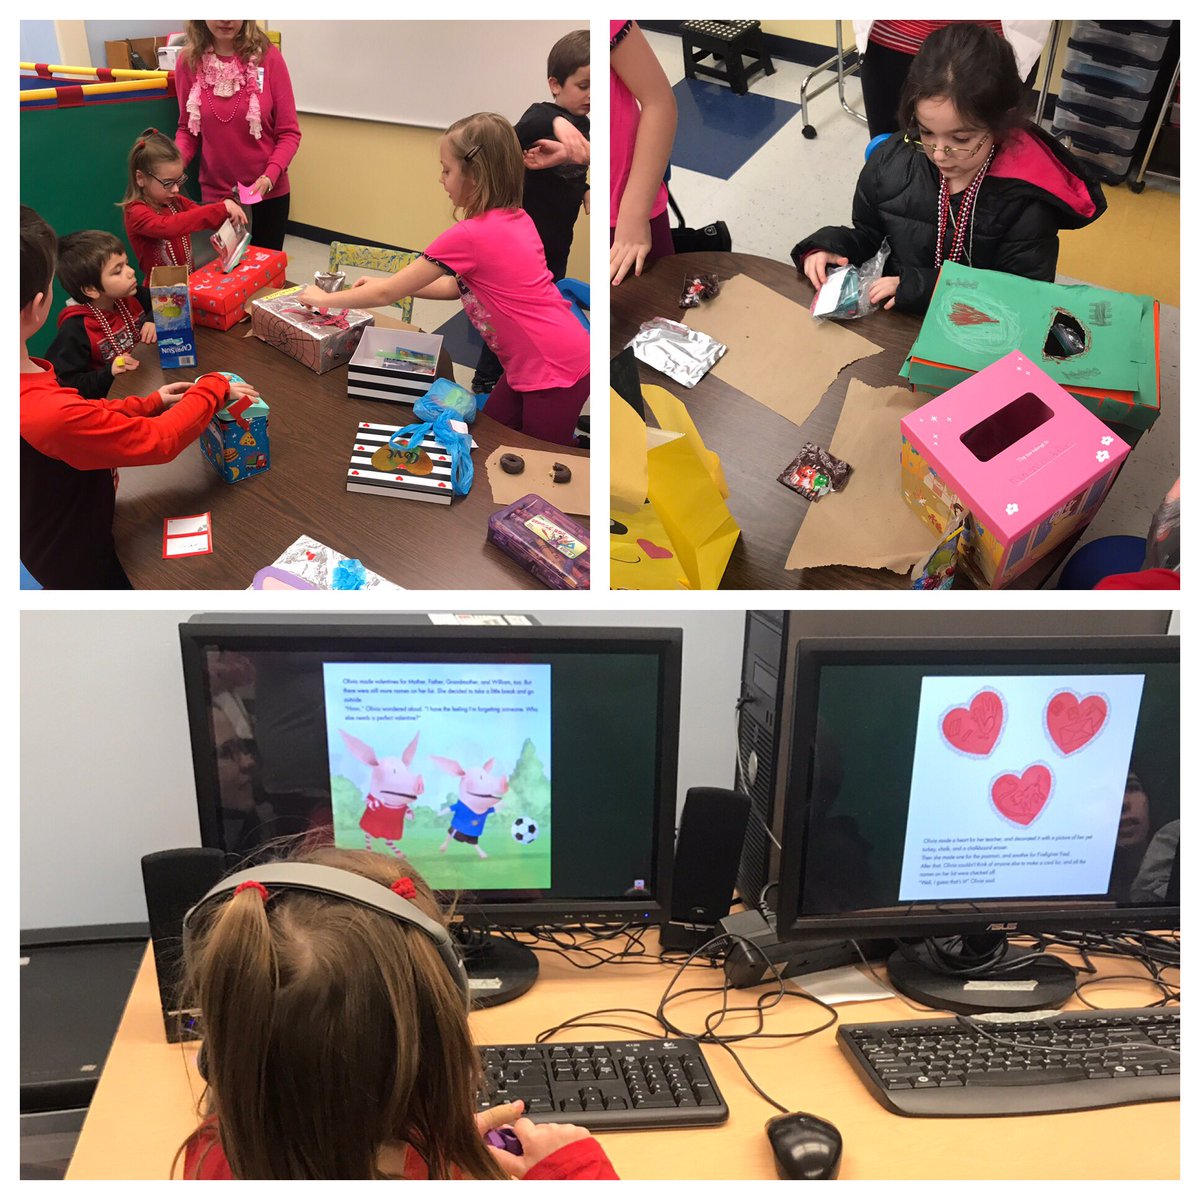 There was a lot of fun activities happening today! #engaged #classroomactivities #autisticsupportclassroom #ValentinesDay2019 @RinggoldNorth @MissCastaneda14